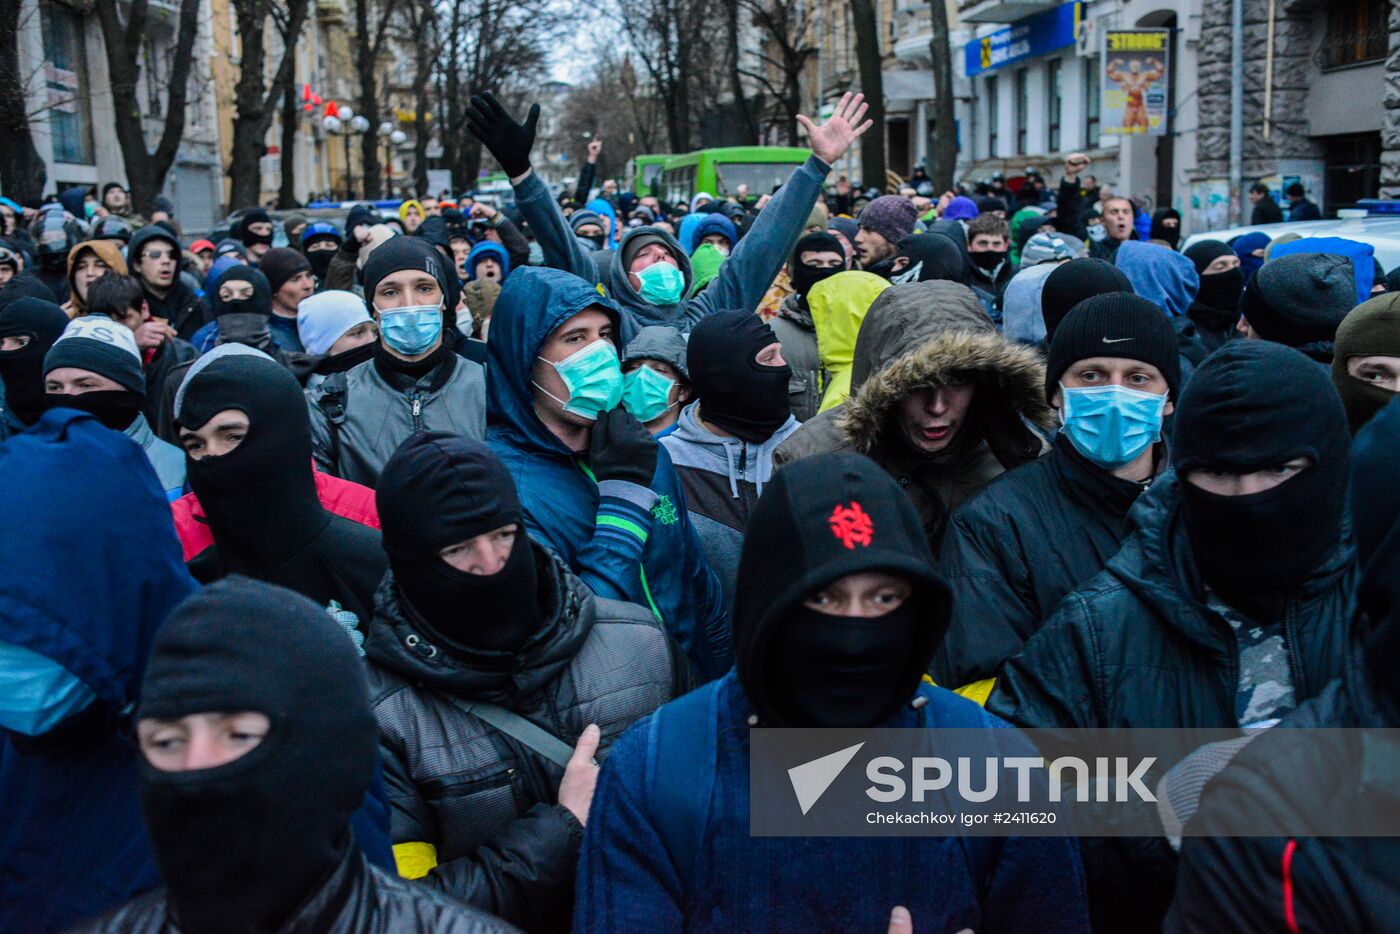 Ultra-radical football fans rally in Kharkov to support the Euromaidan